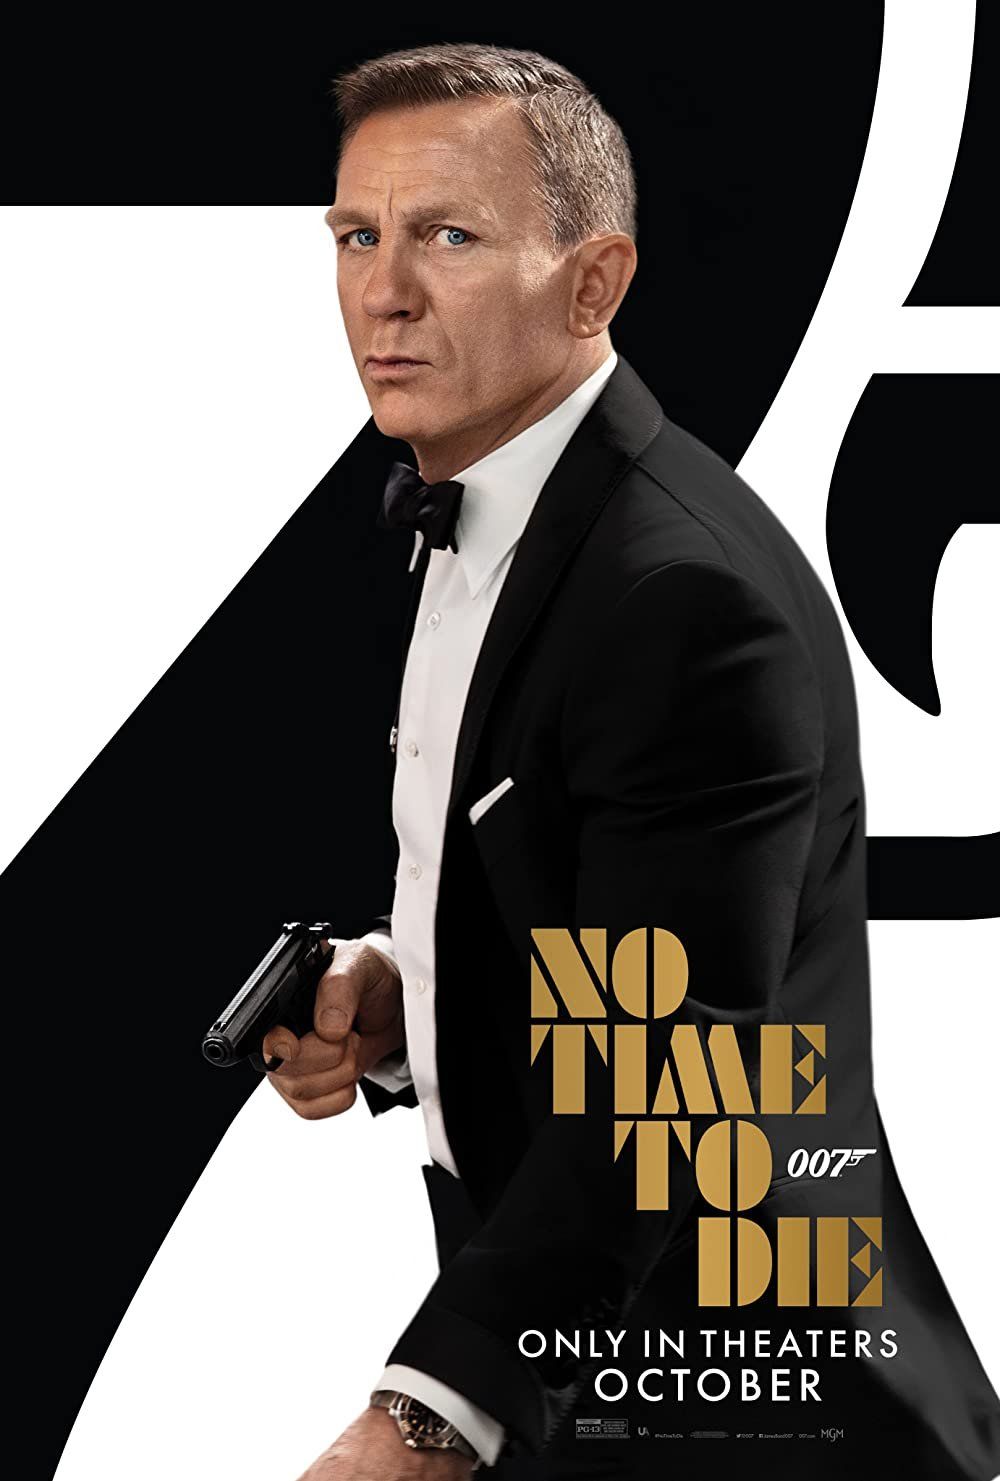 #5. No Time to Die - This was one of the trips to the cinema, Imax screen in Dublin, jabbed and masked, but worth the effort and inconvenience because its Bond.  And he was back. It could have been a disaster, we waited so long to see it the anticipation was very high, but even a delayed Bond is a landmark film occasion. I loved every minute, it had everything I wanted in a Bond film, including great turns from Ana De Armas, Lea Seydoux and a proper baddie in Rami Malik.  Seeing Daniel Craig bow out from the franchise bought a lump to my throat, but I’m excited to see what happens to 007 next. 